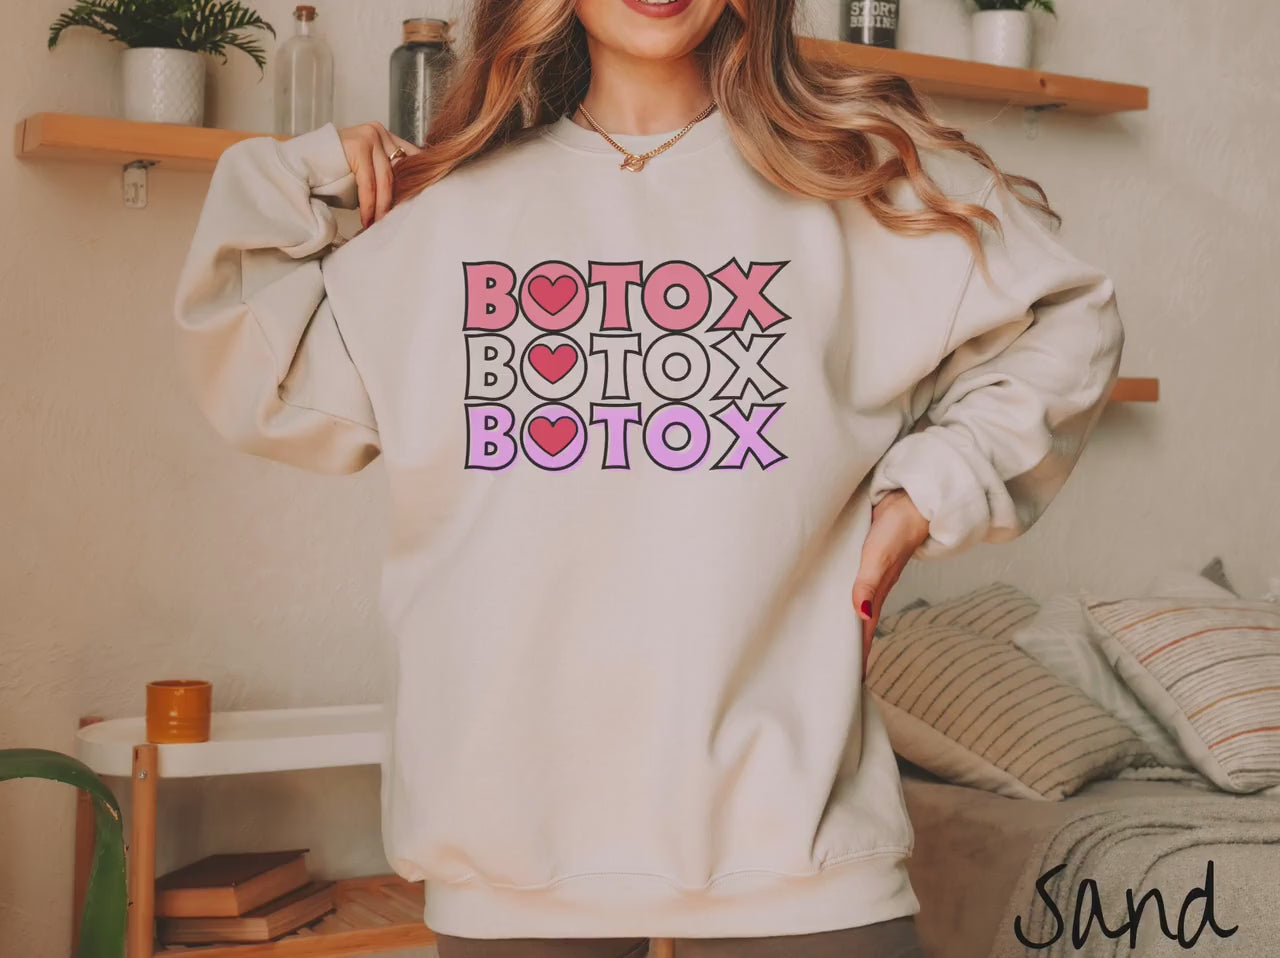 The Botox Valentine's Sweatshirt, V-Day Funny Skincare Gift for Friend